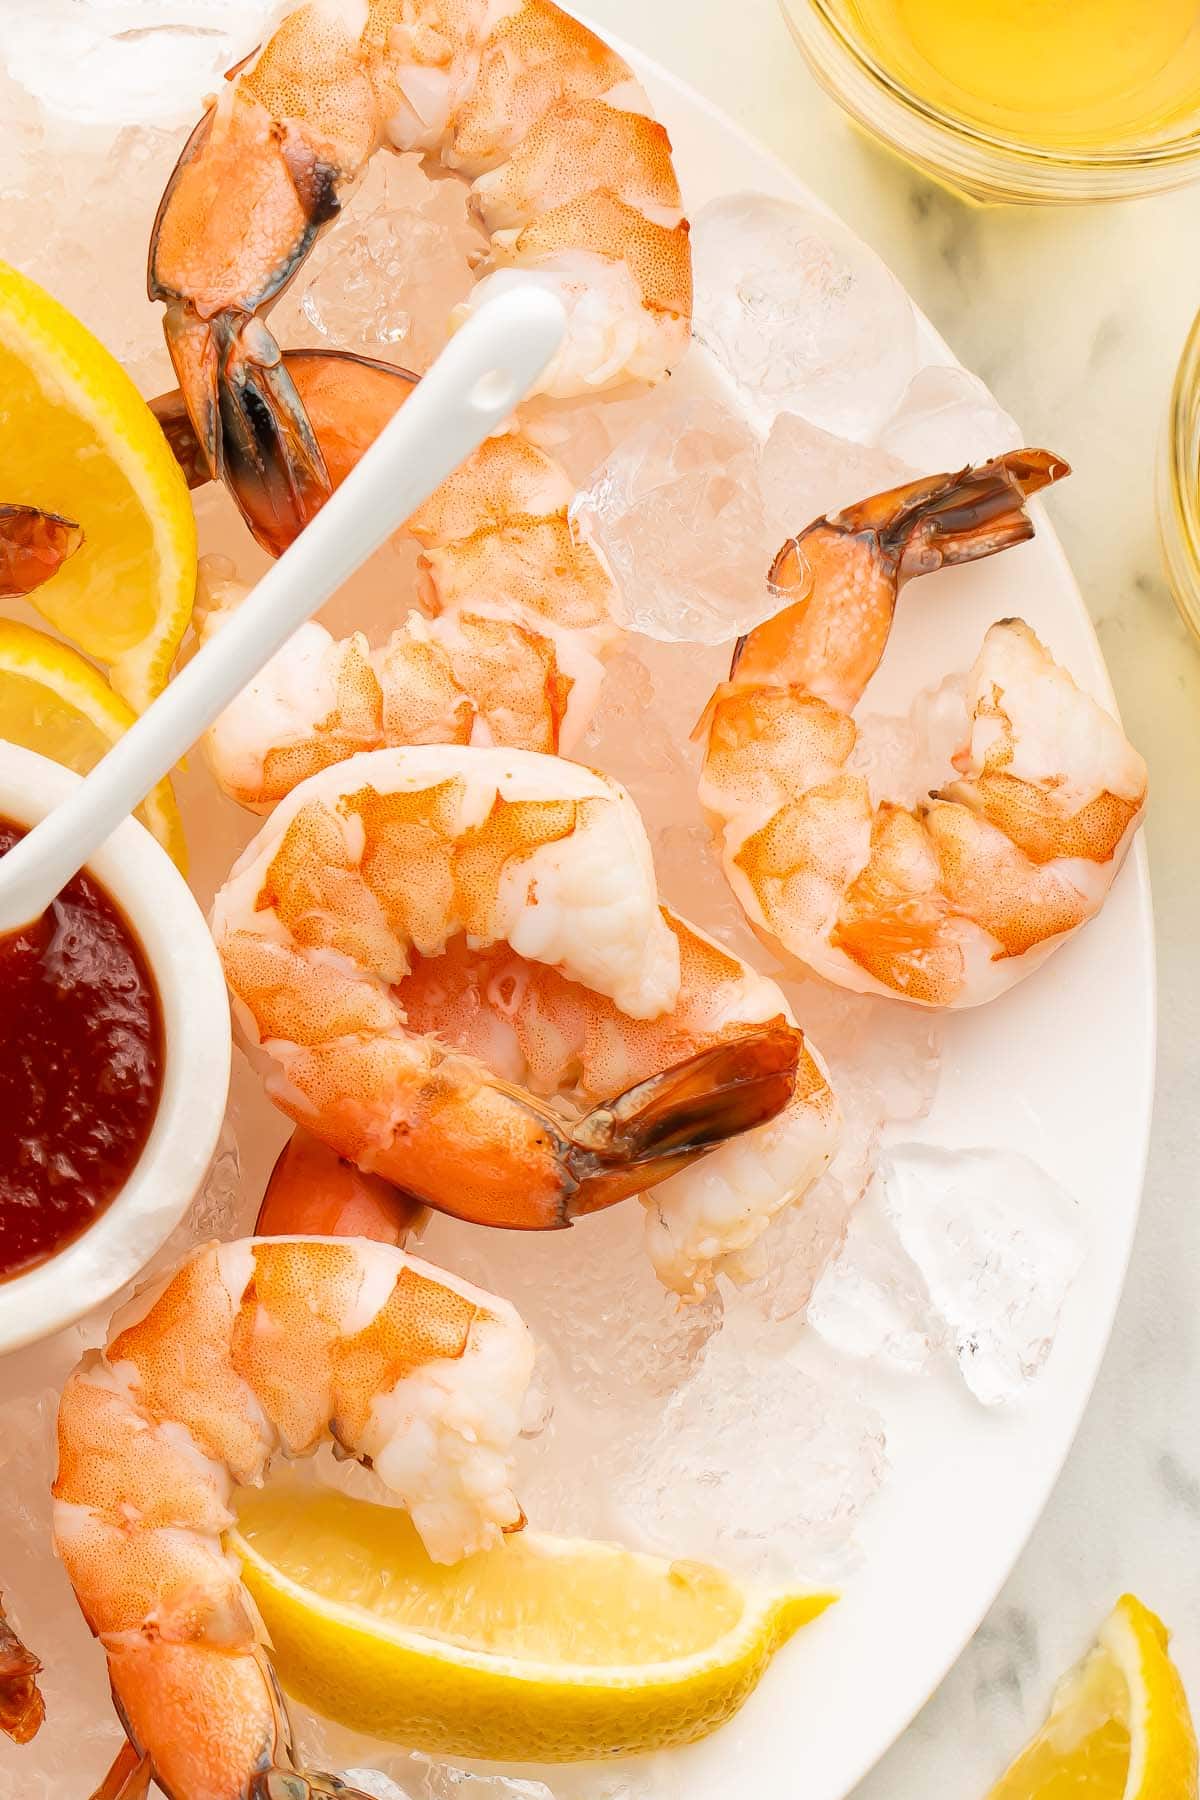 A close-up of poached shrimp arranged on a platter of ice next to a small dipping bowl of shrimp cocktail sauce.